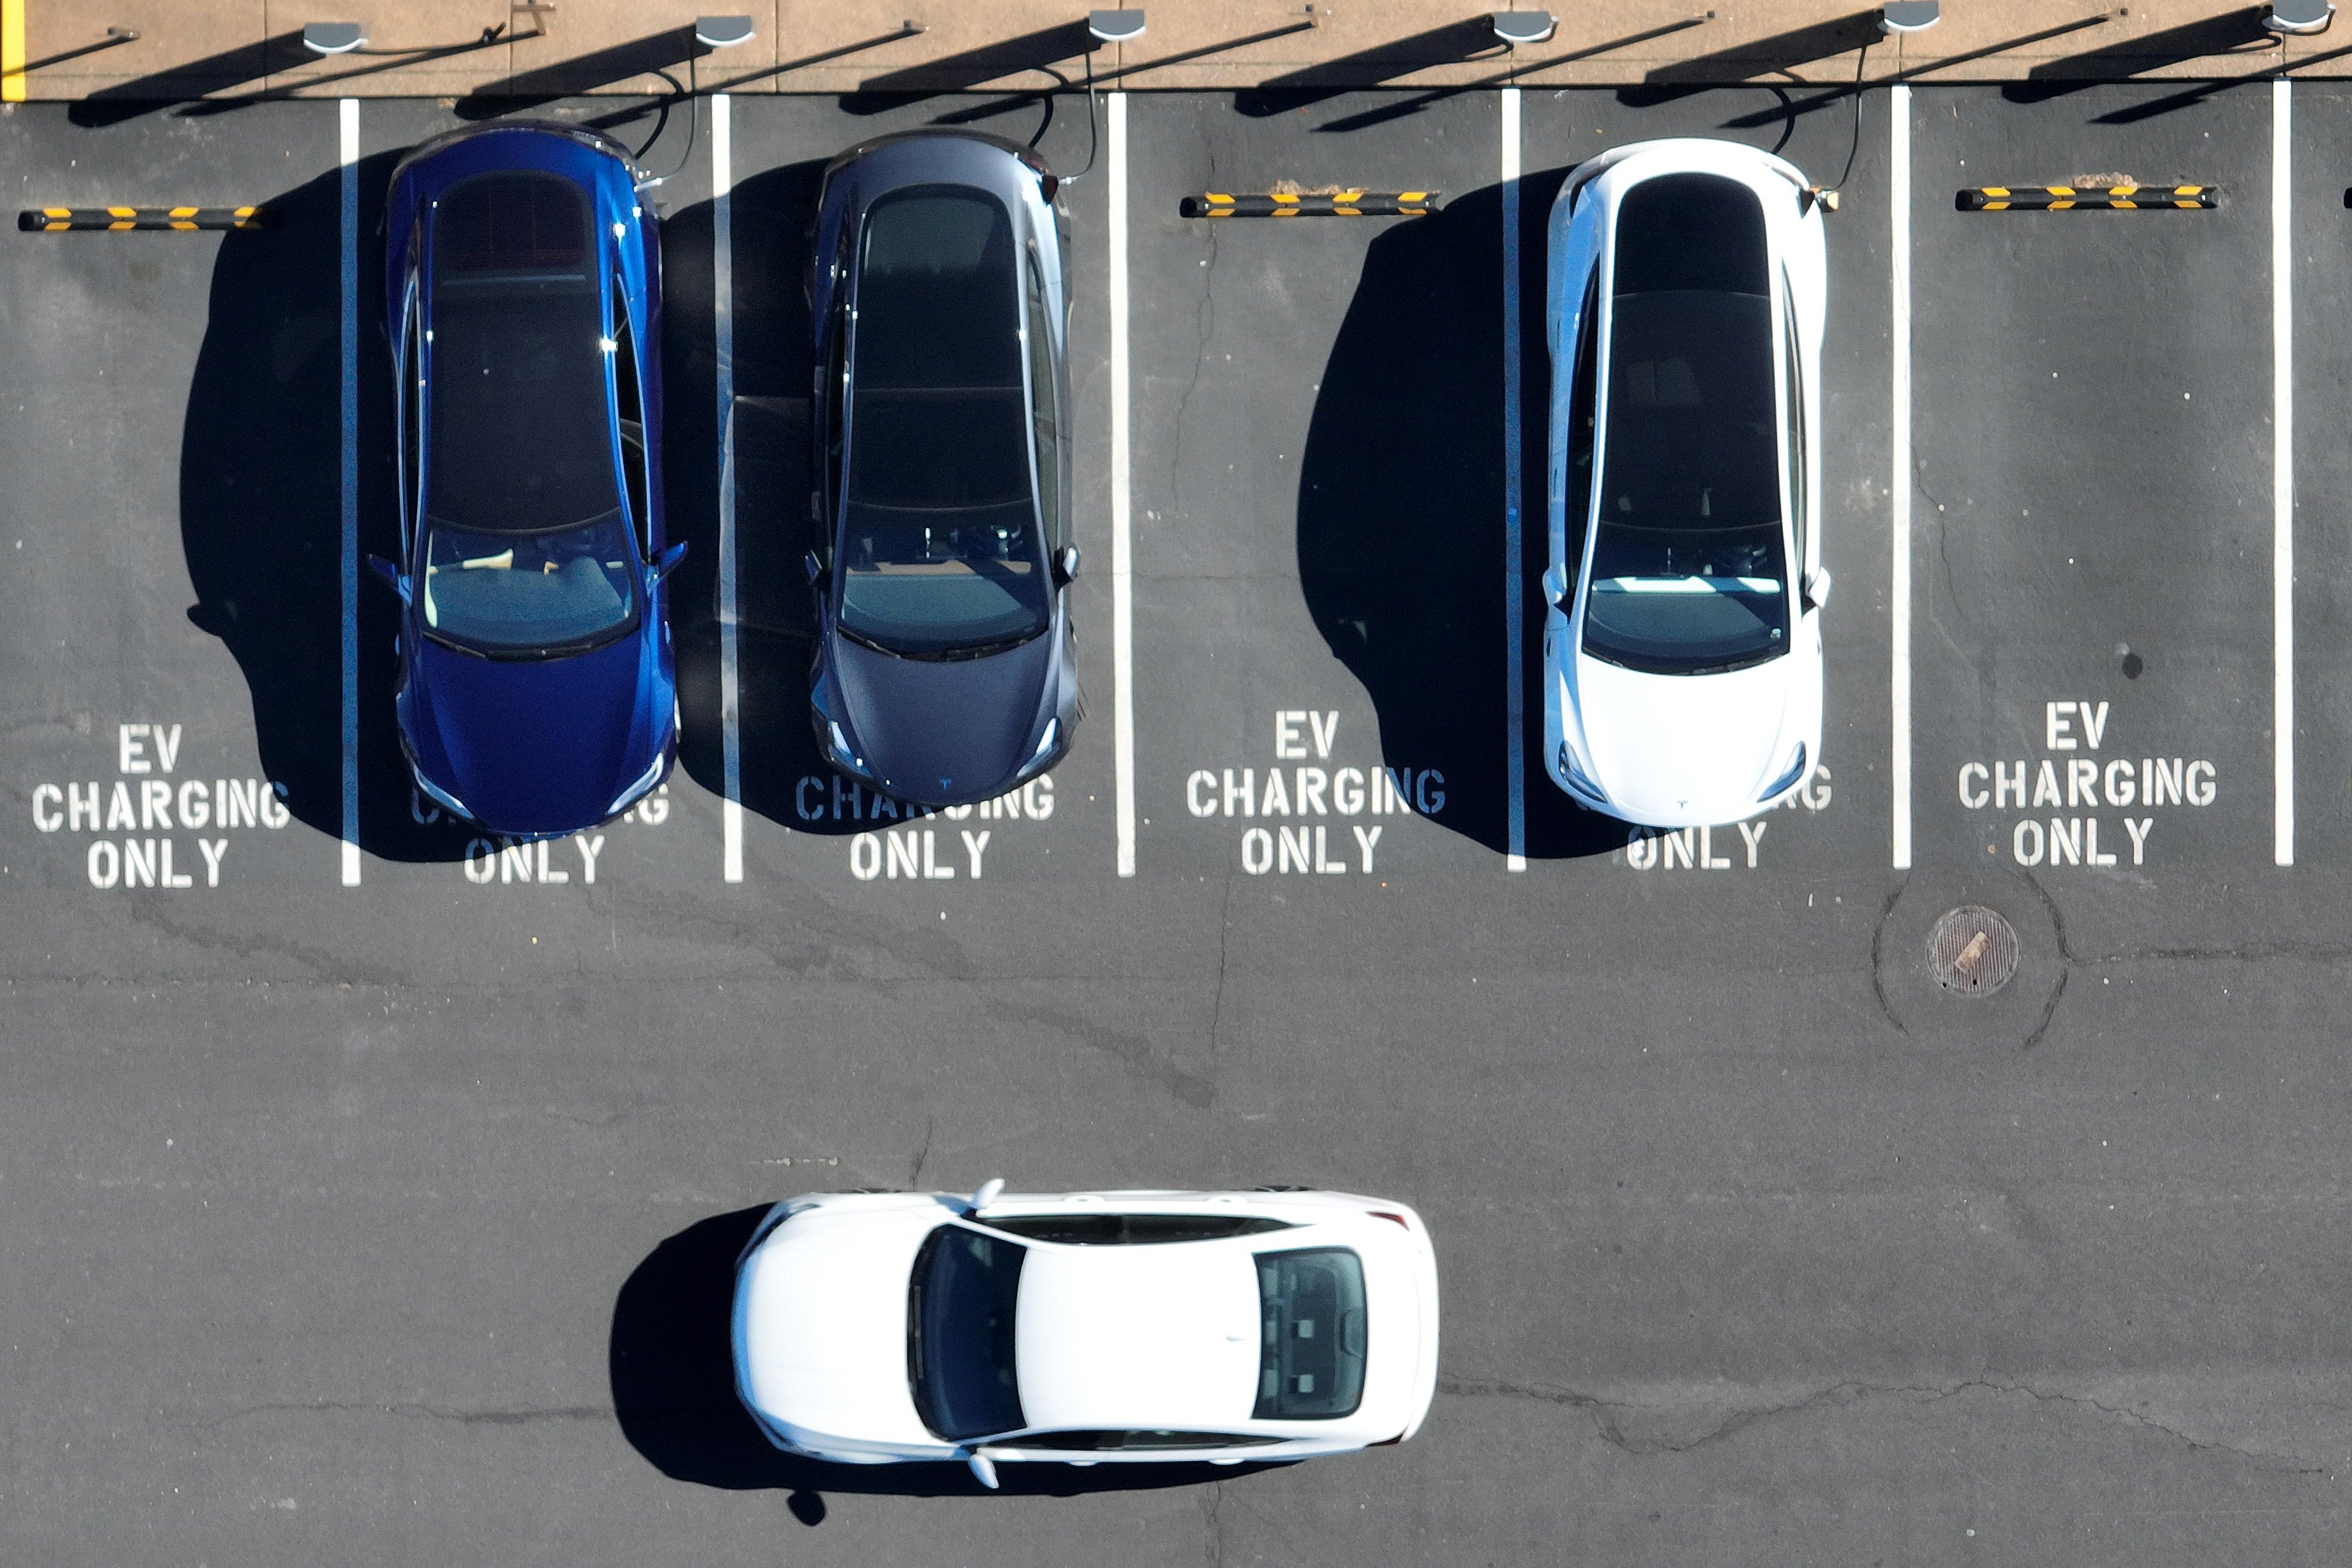 In an aerial view, Tesla cars recharge at a Tesla charger station on February 15, 2023 in Corte Madera, California. Electric car company Tesla is partnering with the U.S. federal government to expand electric vehicle charging infrastructure in the United States. Tesla announced plans to open an estimated 7,500 of its Tesla Superchargers in the country to all brands of electric vehicles by the end of 2024. (Photo by Justin Sullivan/Getty Images)